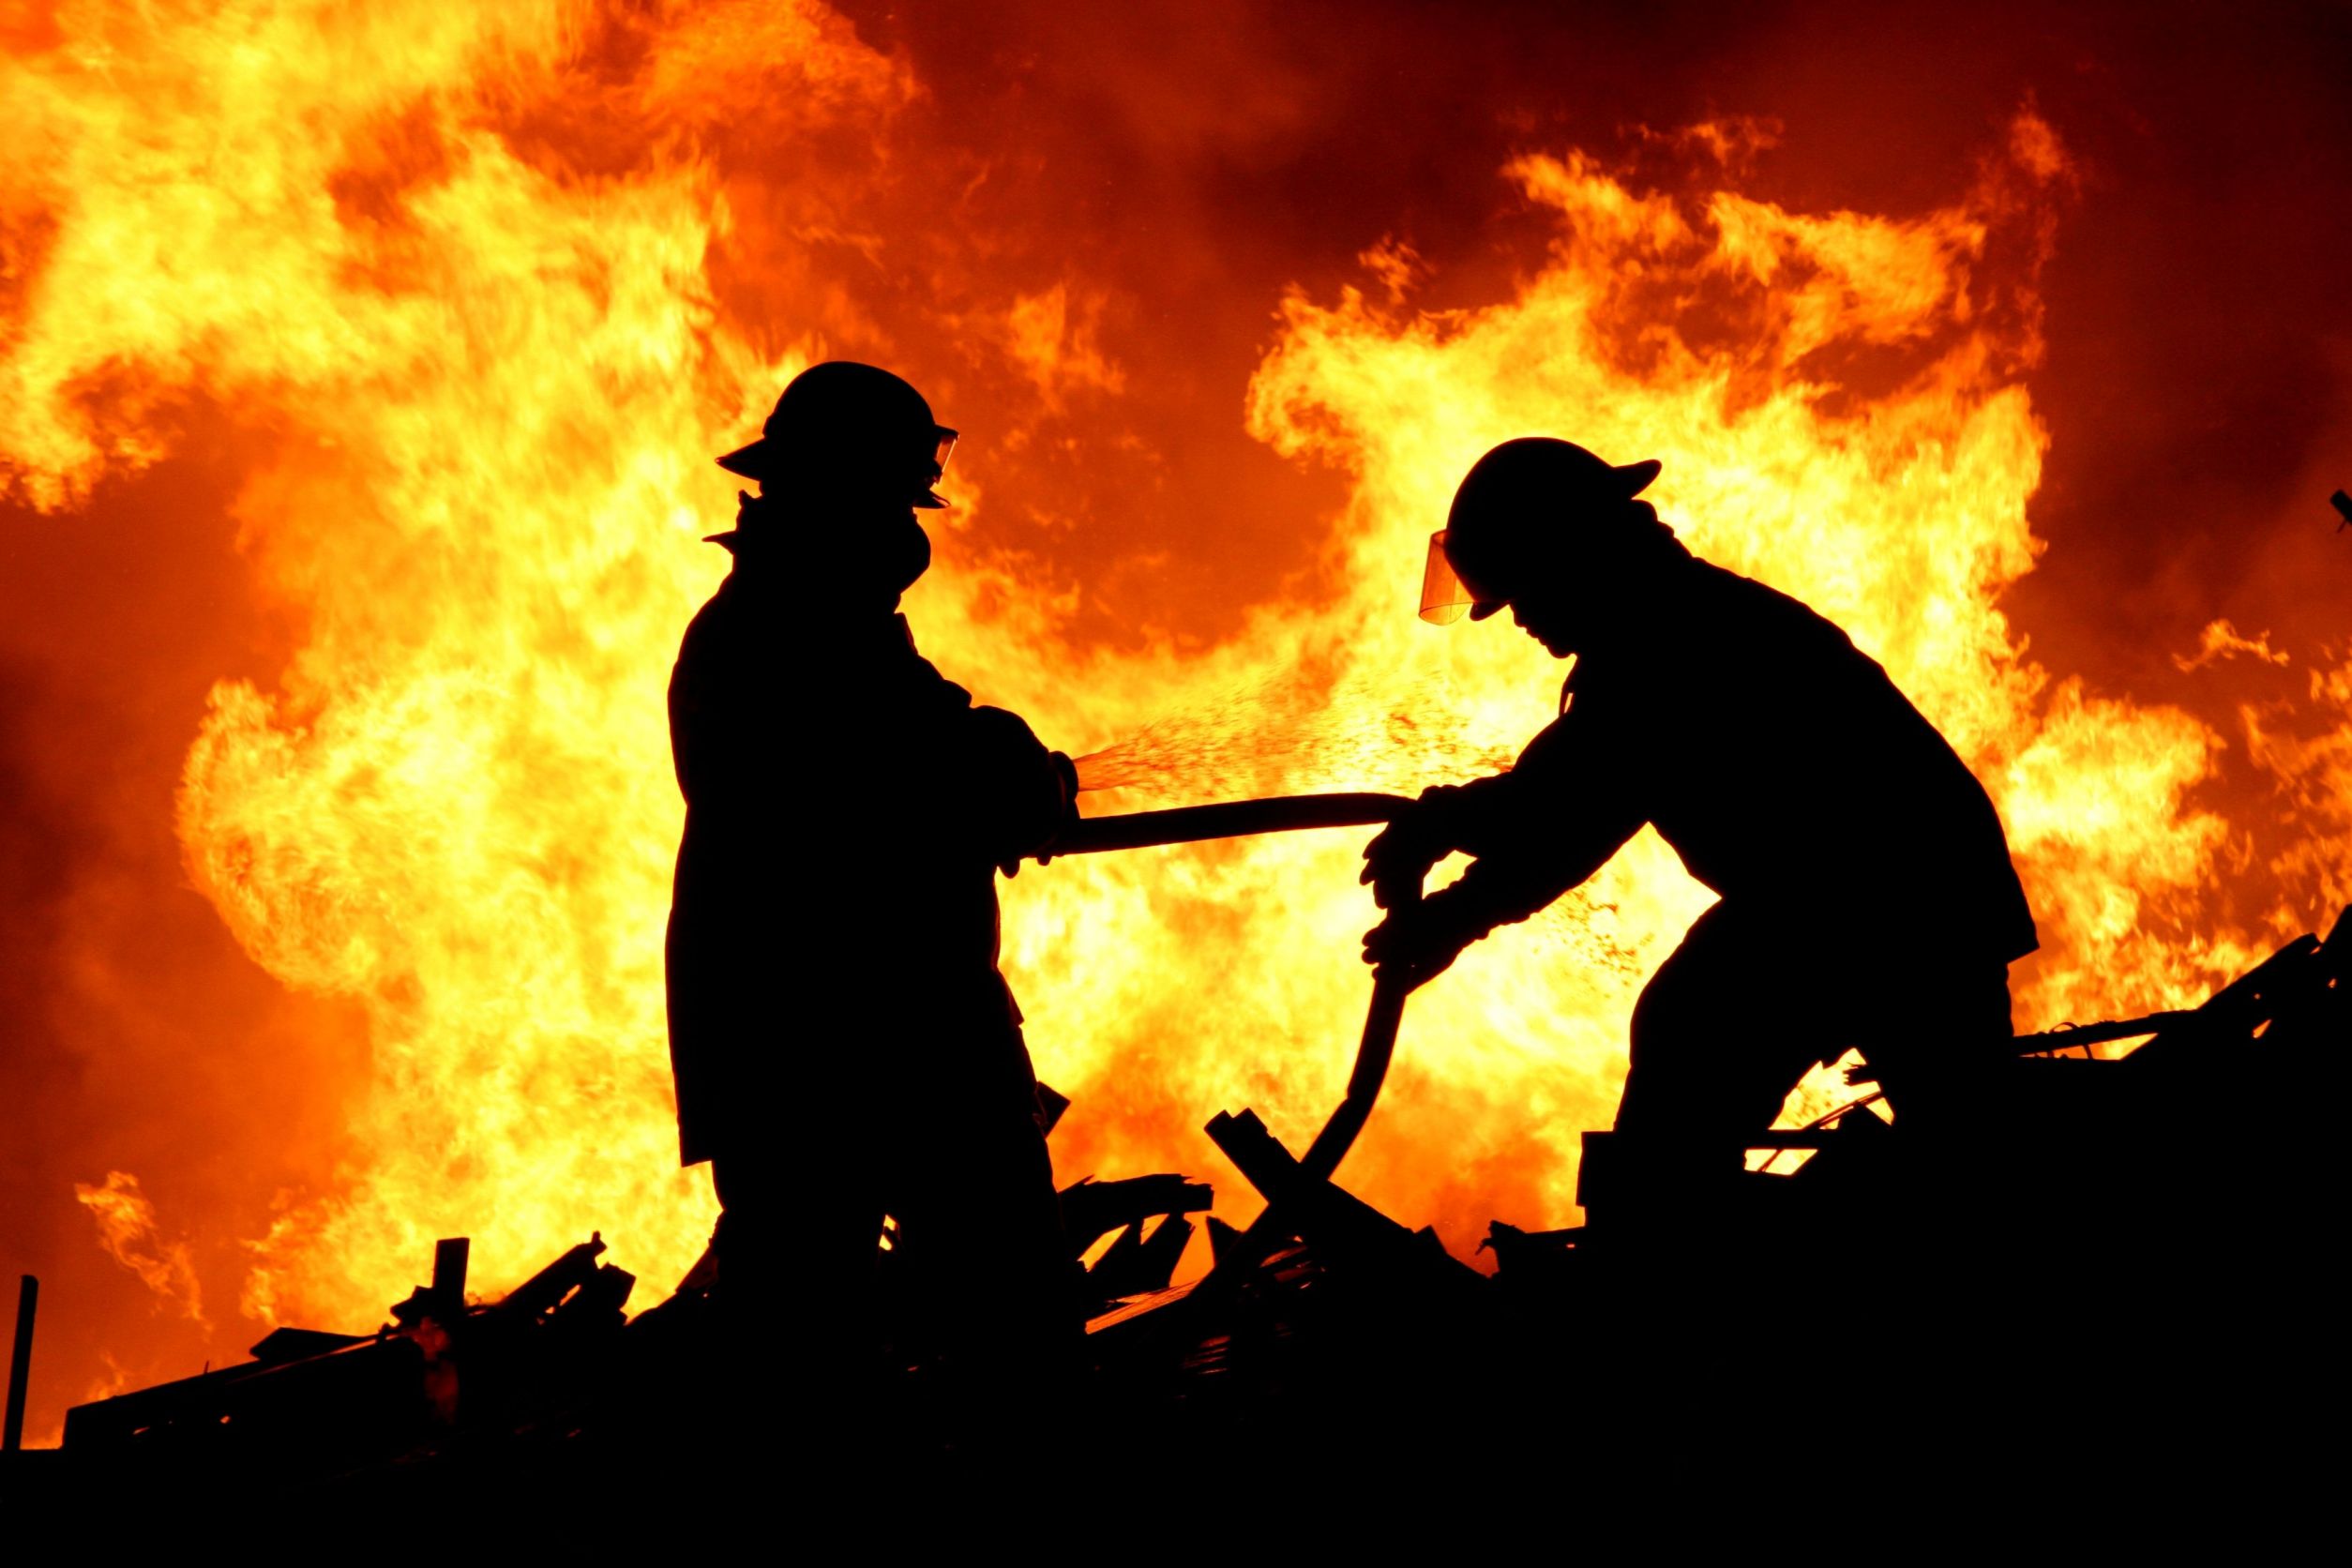 Get Complete Fire Protection Service in Biloxi, MS